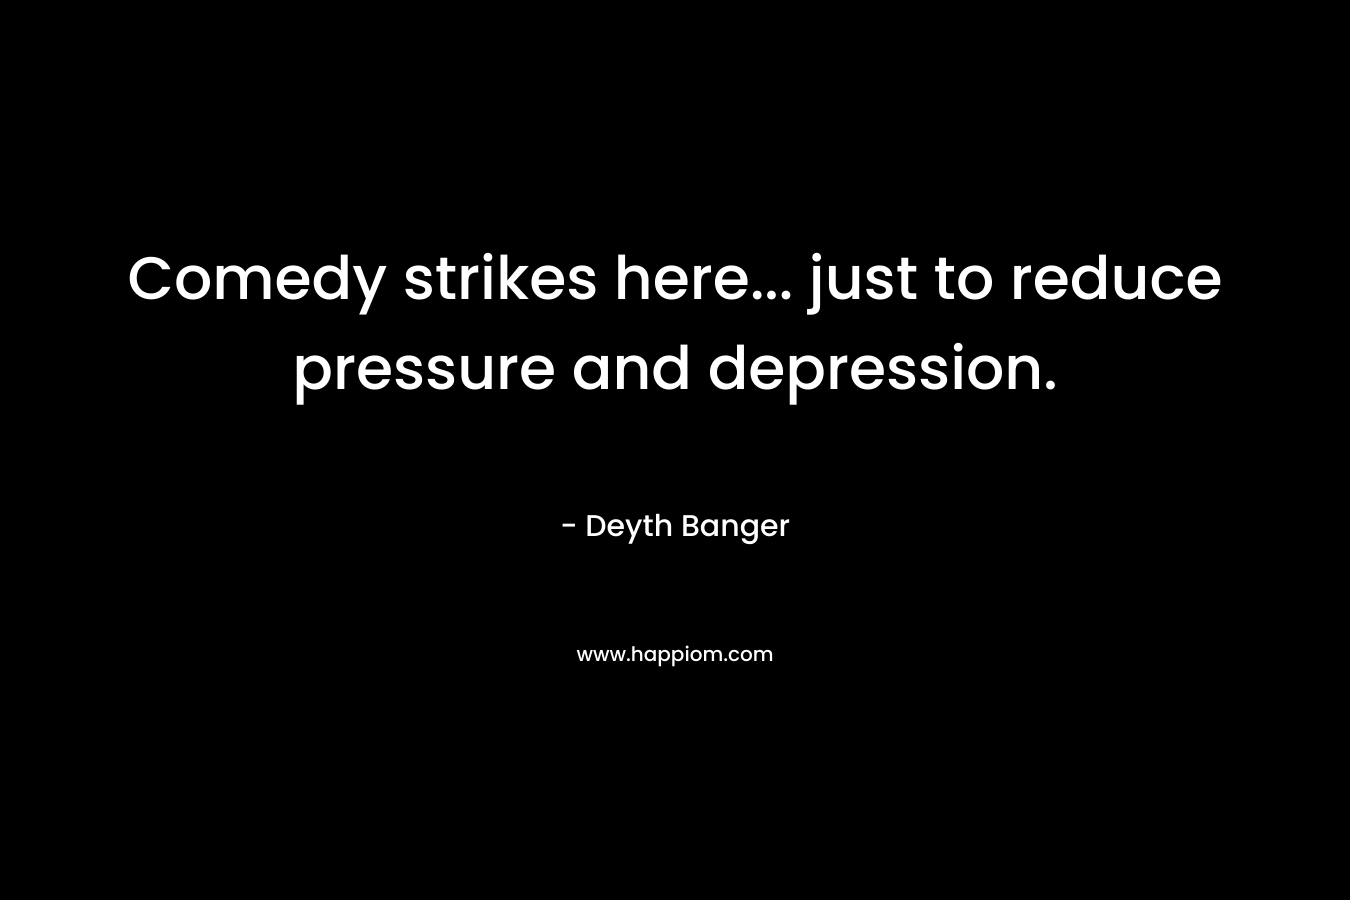 Comedy strikes here… just to reduce pressure and depression. – Deyth Banger